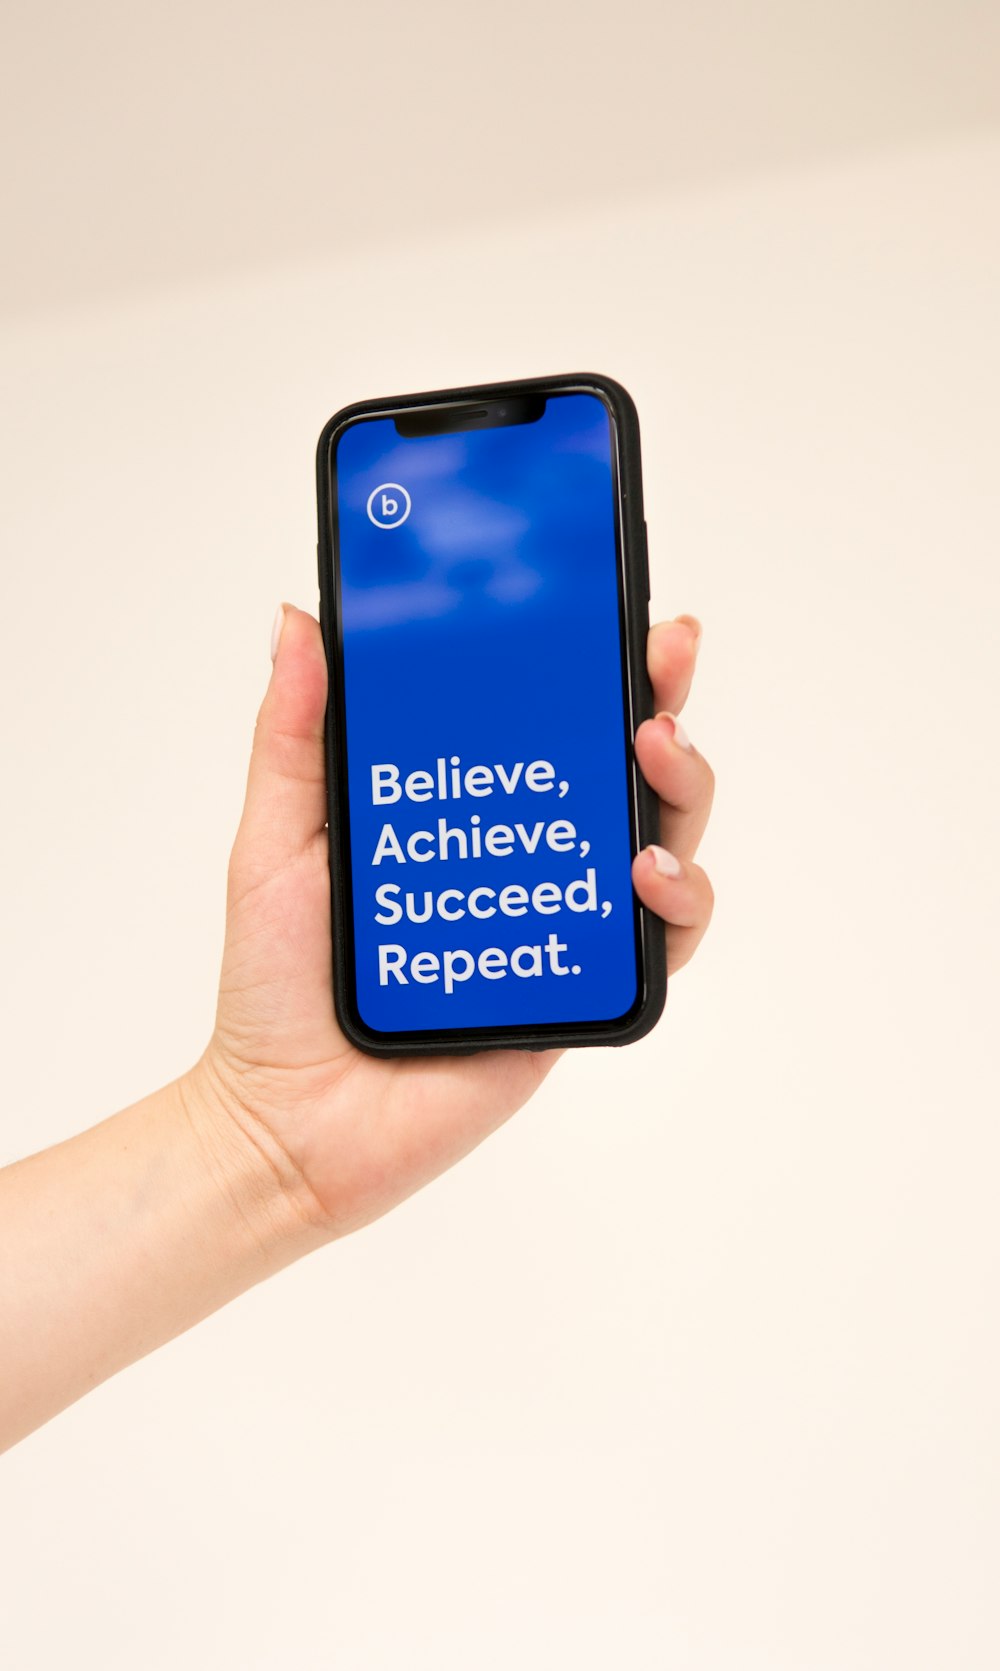 believe, achieve, succeed, and repeat quote